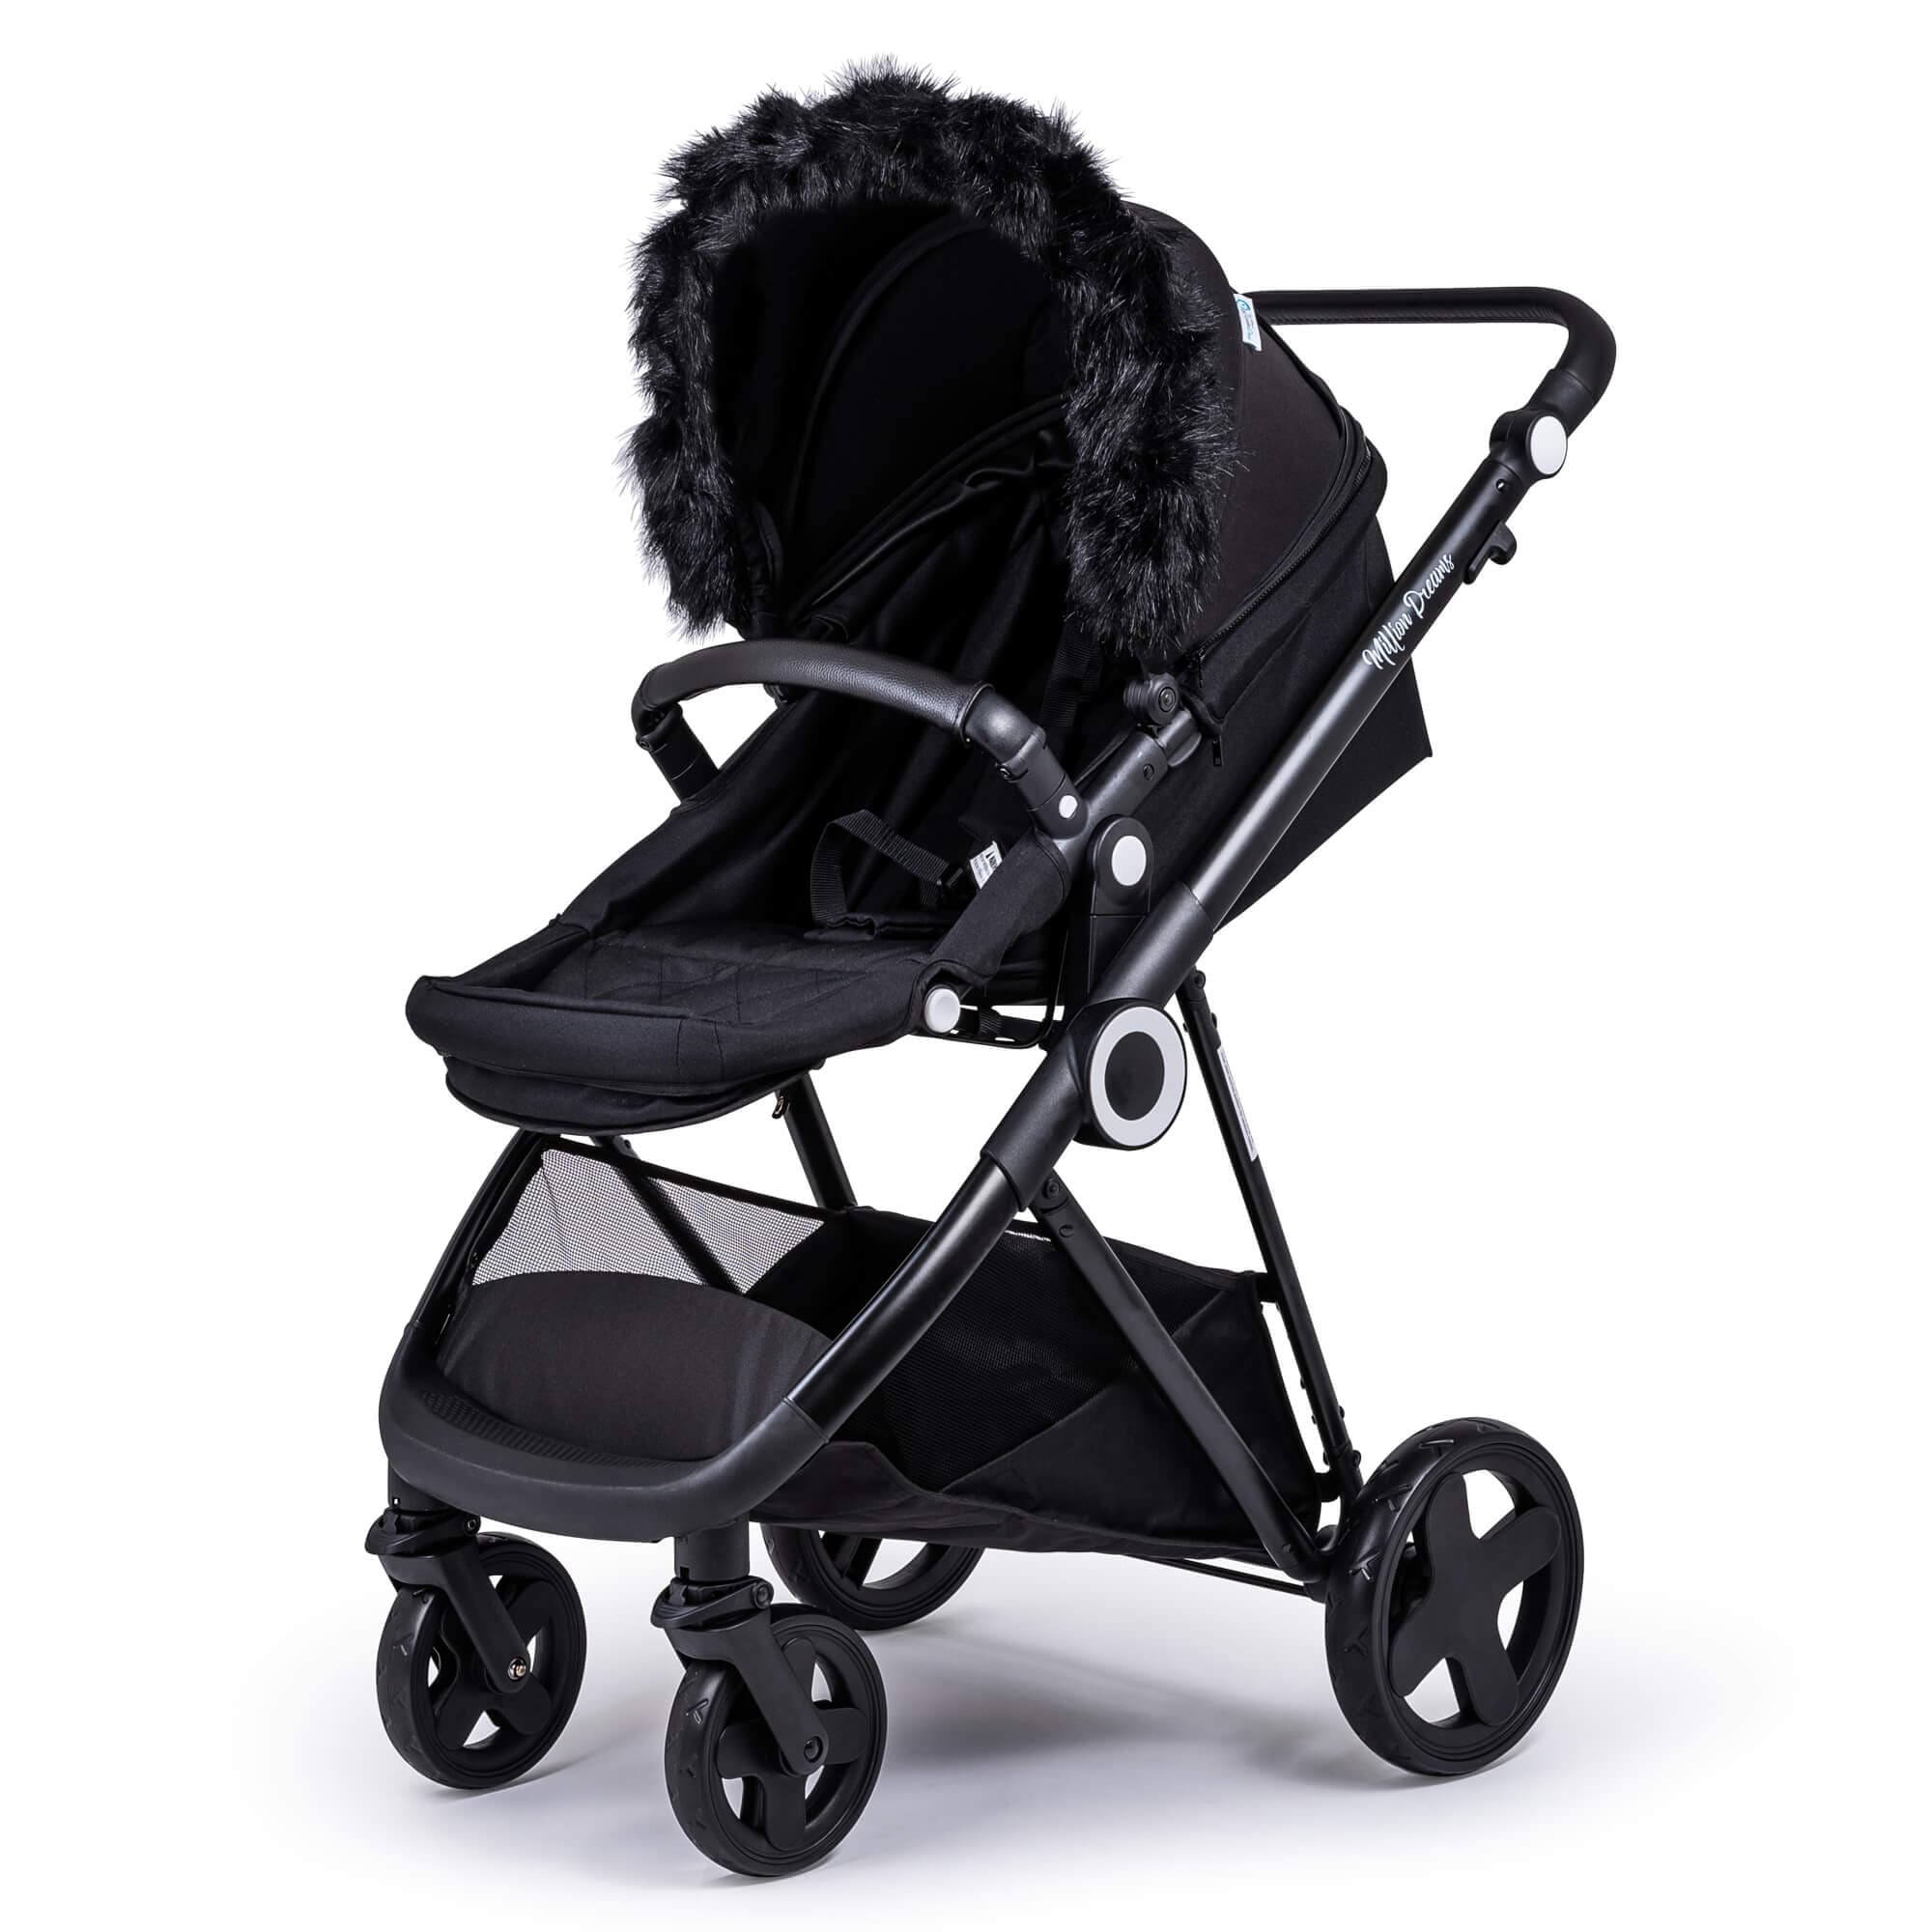 Pram Fur Hood Trim Attachment for Pushchair Compatible with Silver Cross - For Your Little One